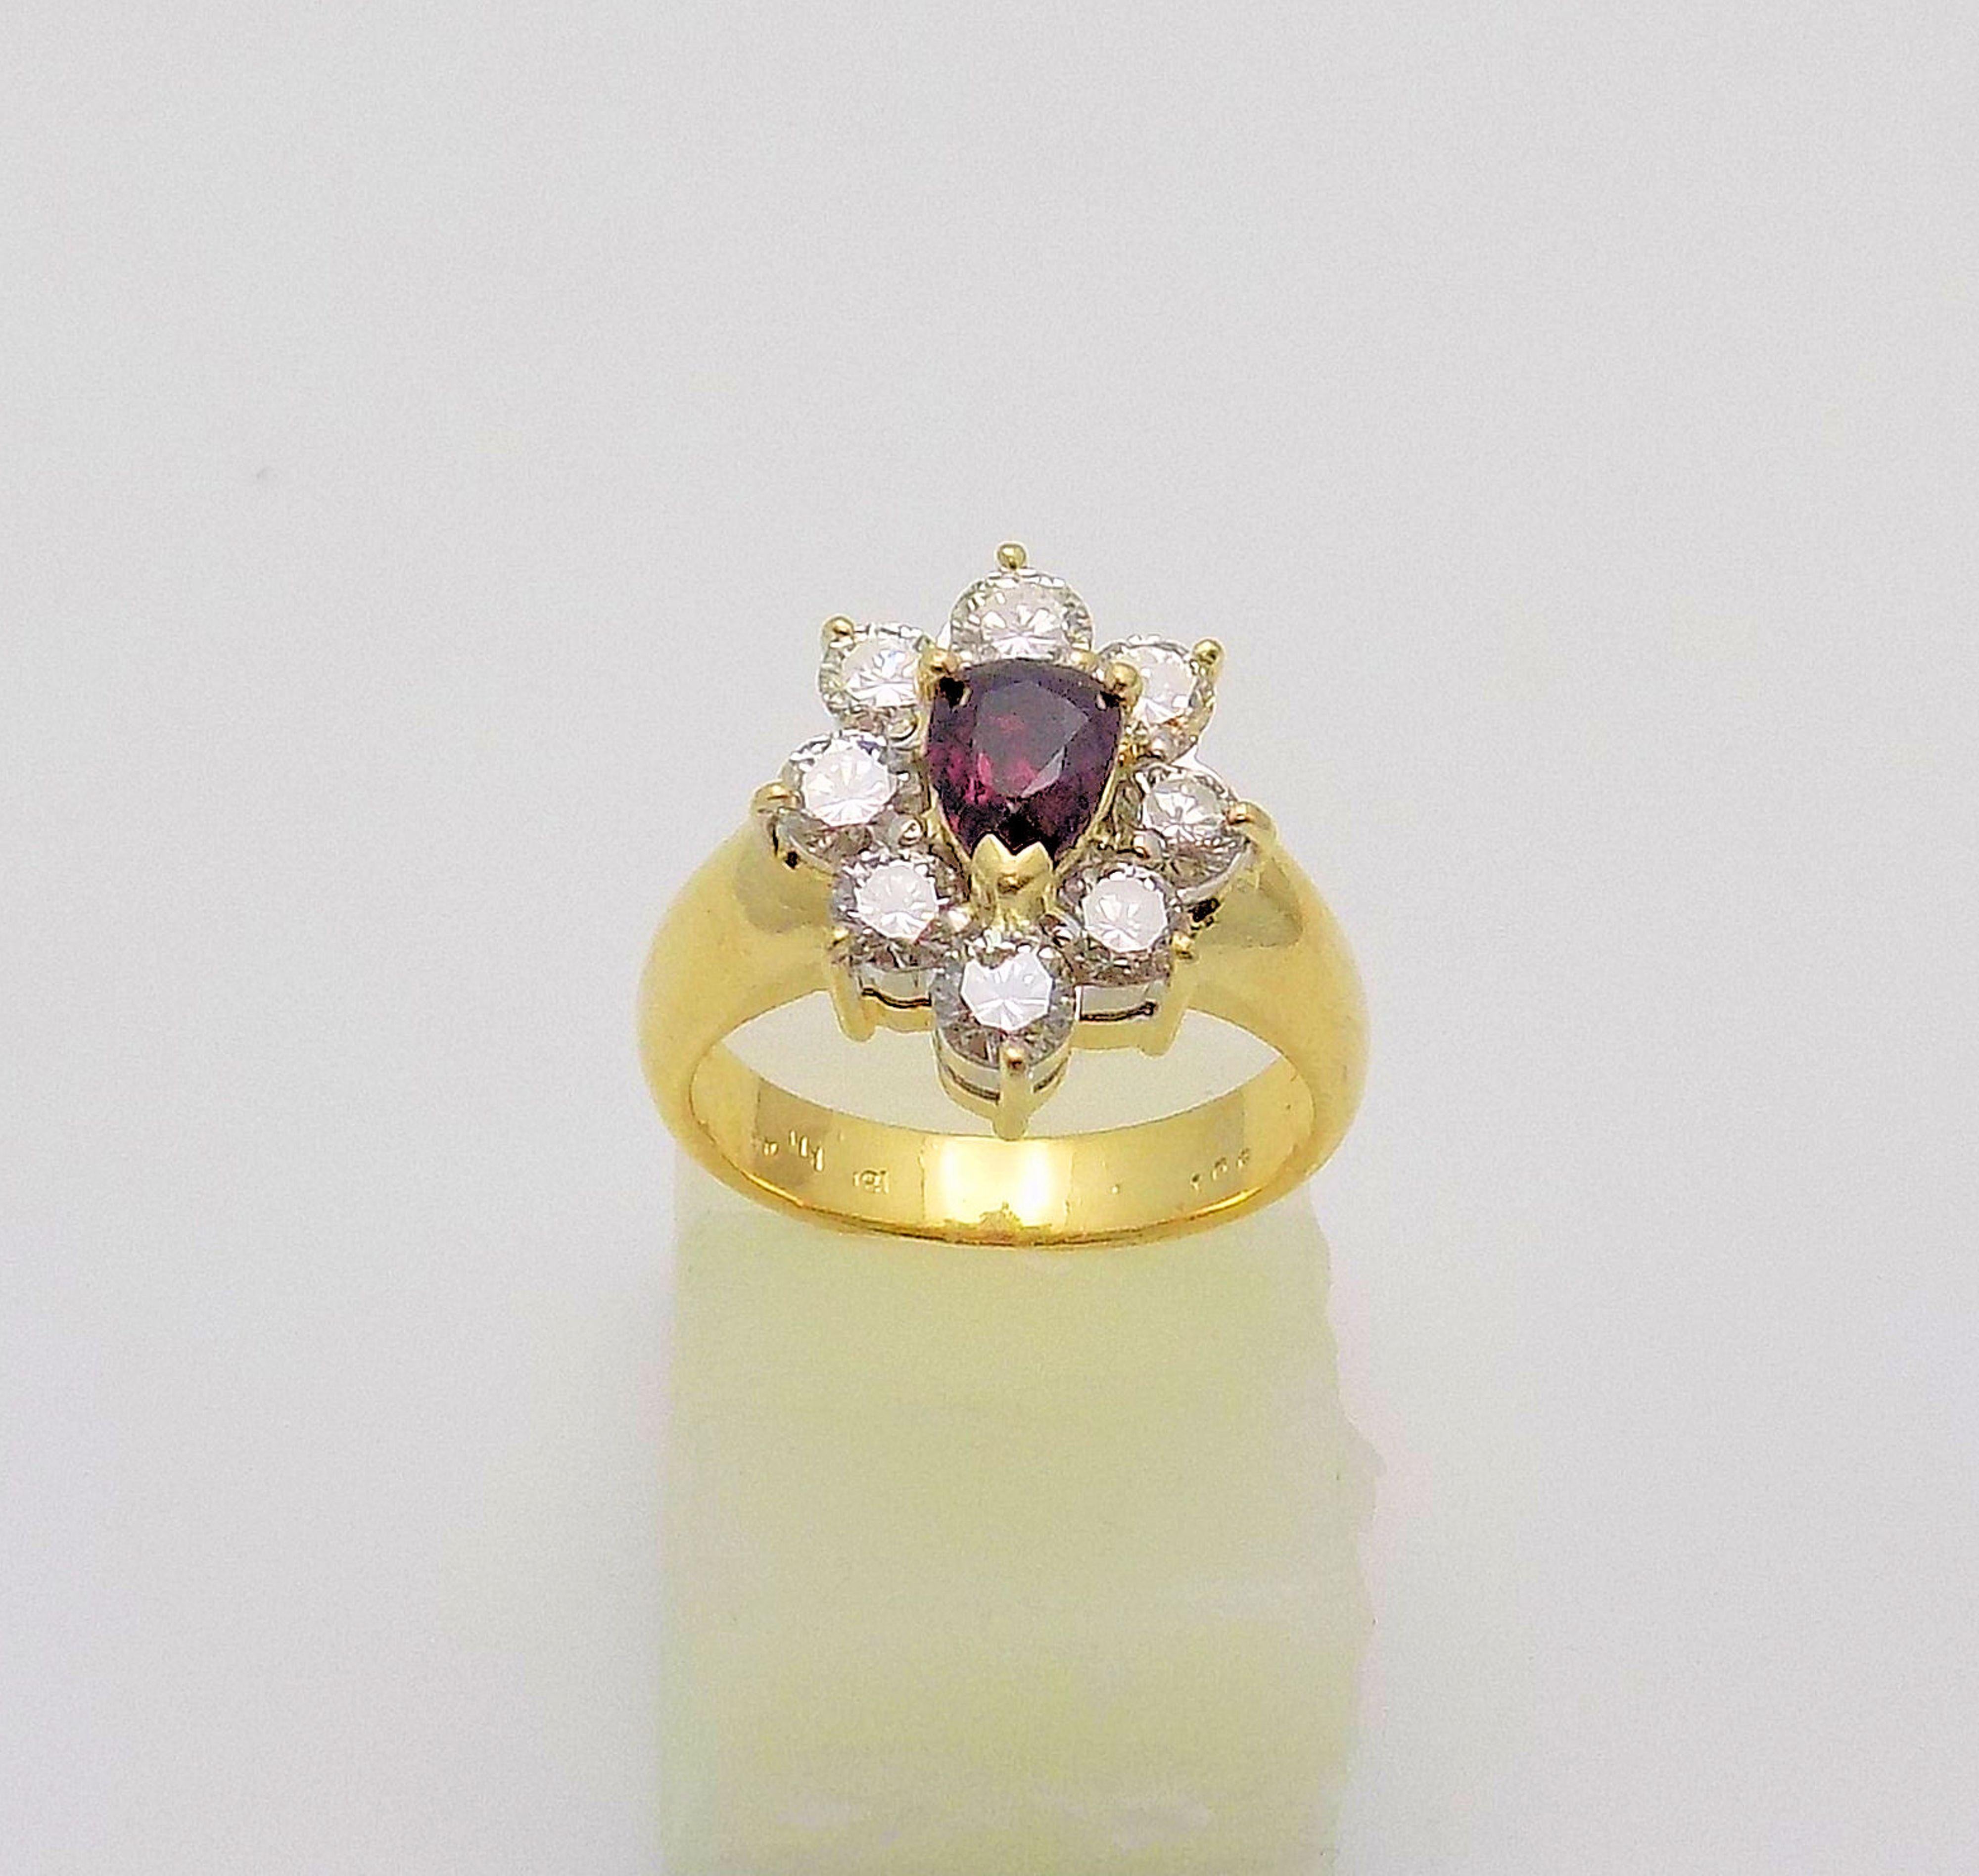 Classic 18 Karat Yellow Gold and White Gold Ring featuring 1 Pear Shape Ruby 1.00 Carat (Nick on Table), 8 Round Brilliant Diamonds 1.20 Carat Total Weight, VS, H-J; Finger Size 6; 5.1 DWT or 7.93 Grams.

The Jewelry Gallery offers ring sizing (at